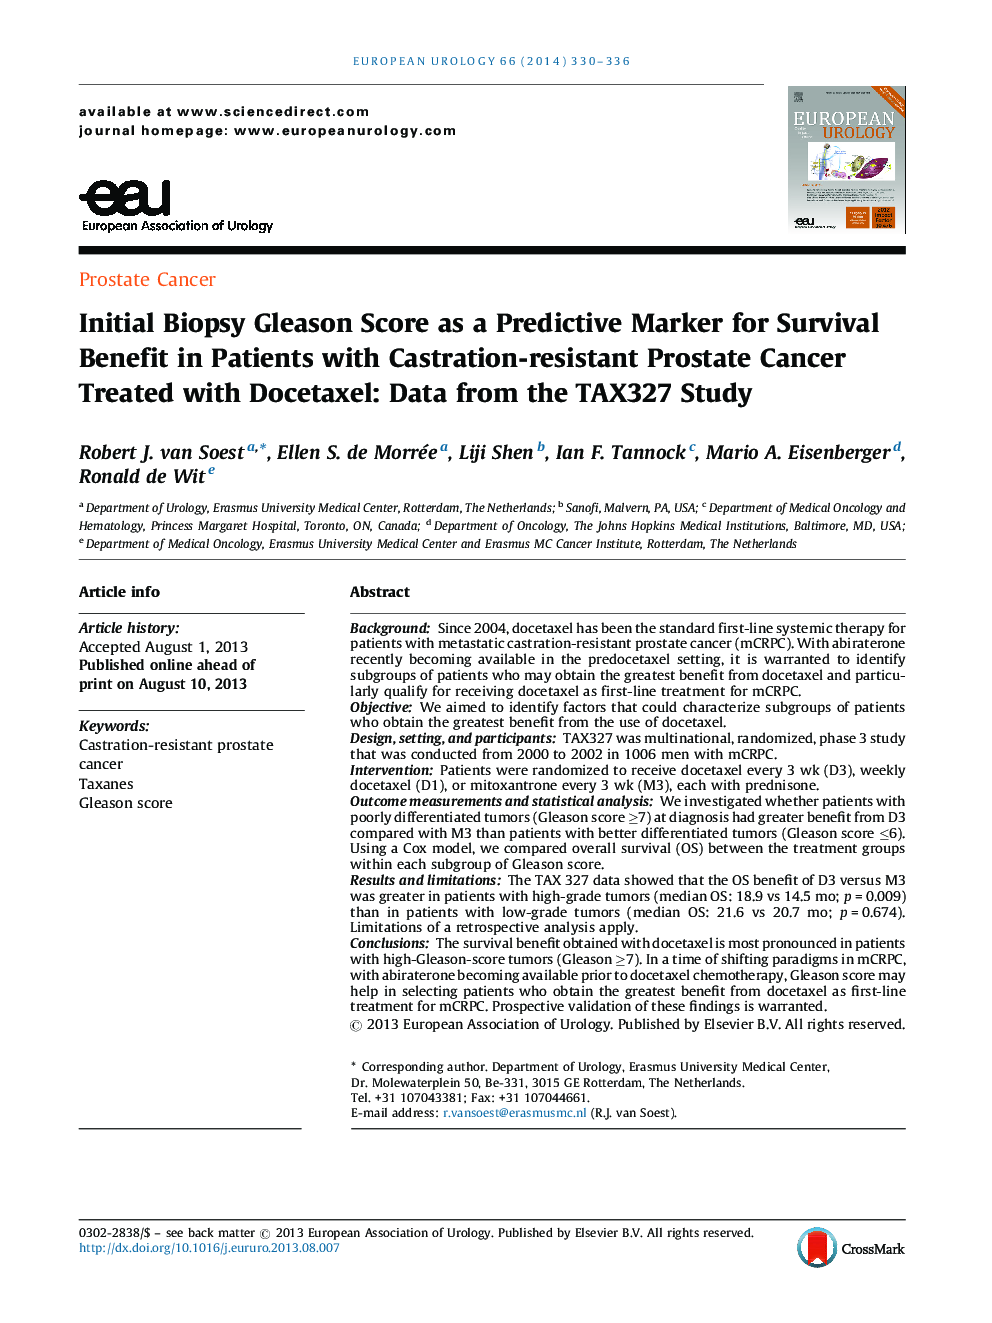 Initial Biopsy Gleason Score as a Predictive Marker for Survival Benefit in Patients with Castration-resistant Prostate Cancer Treated with Docetaxel: Data from the TAX327 Study